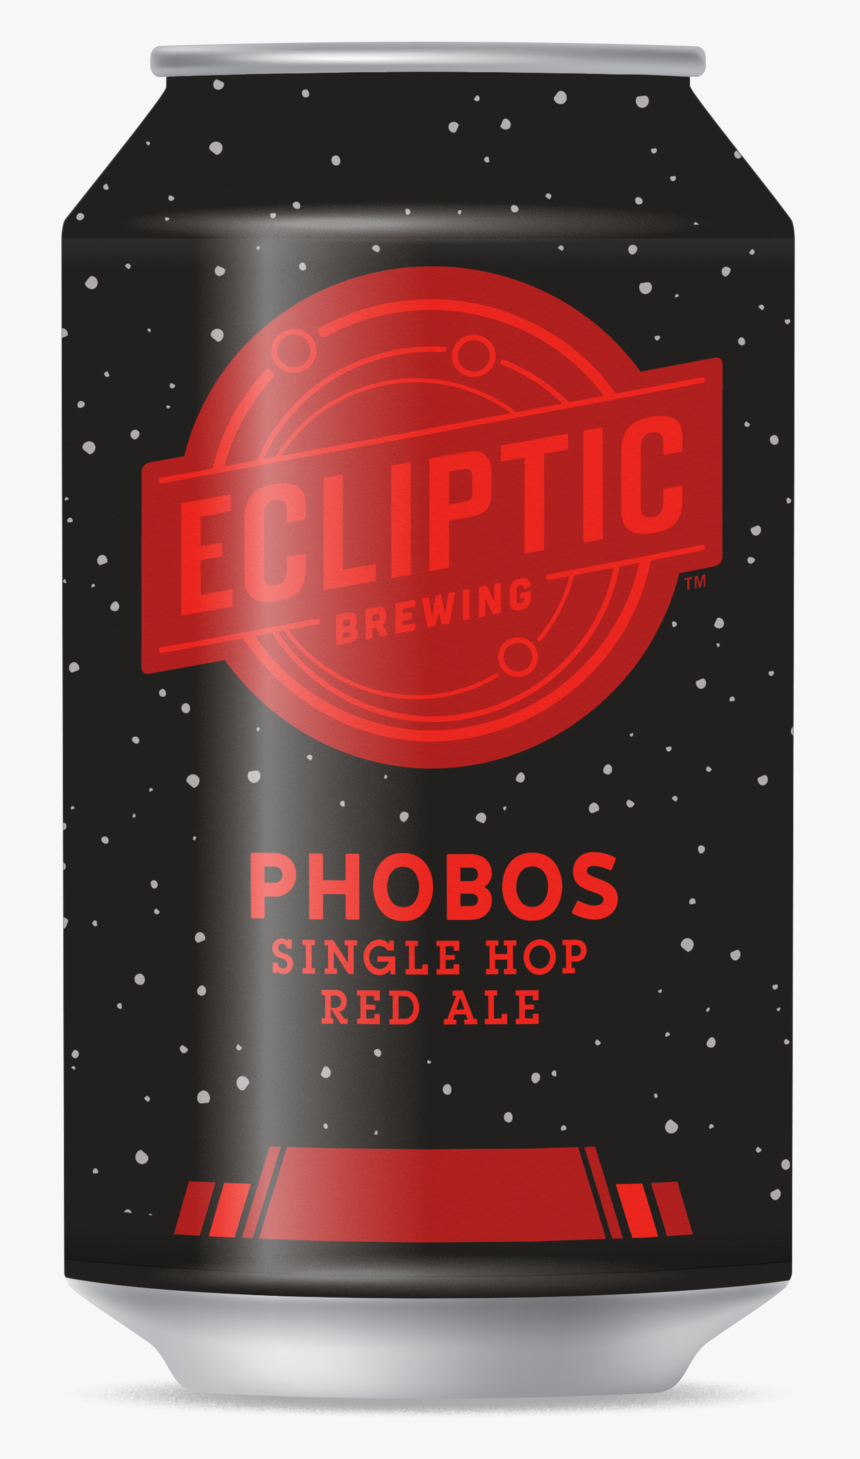 Image Courtesy Ecliptic Brewing Company - Guinness, HD Png Download, Free Download